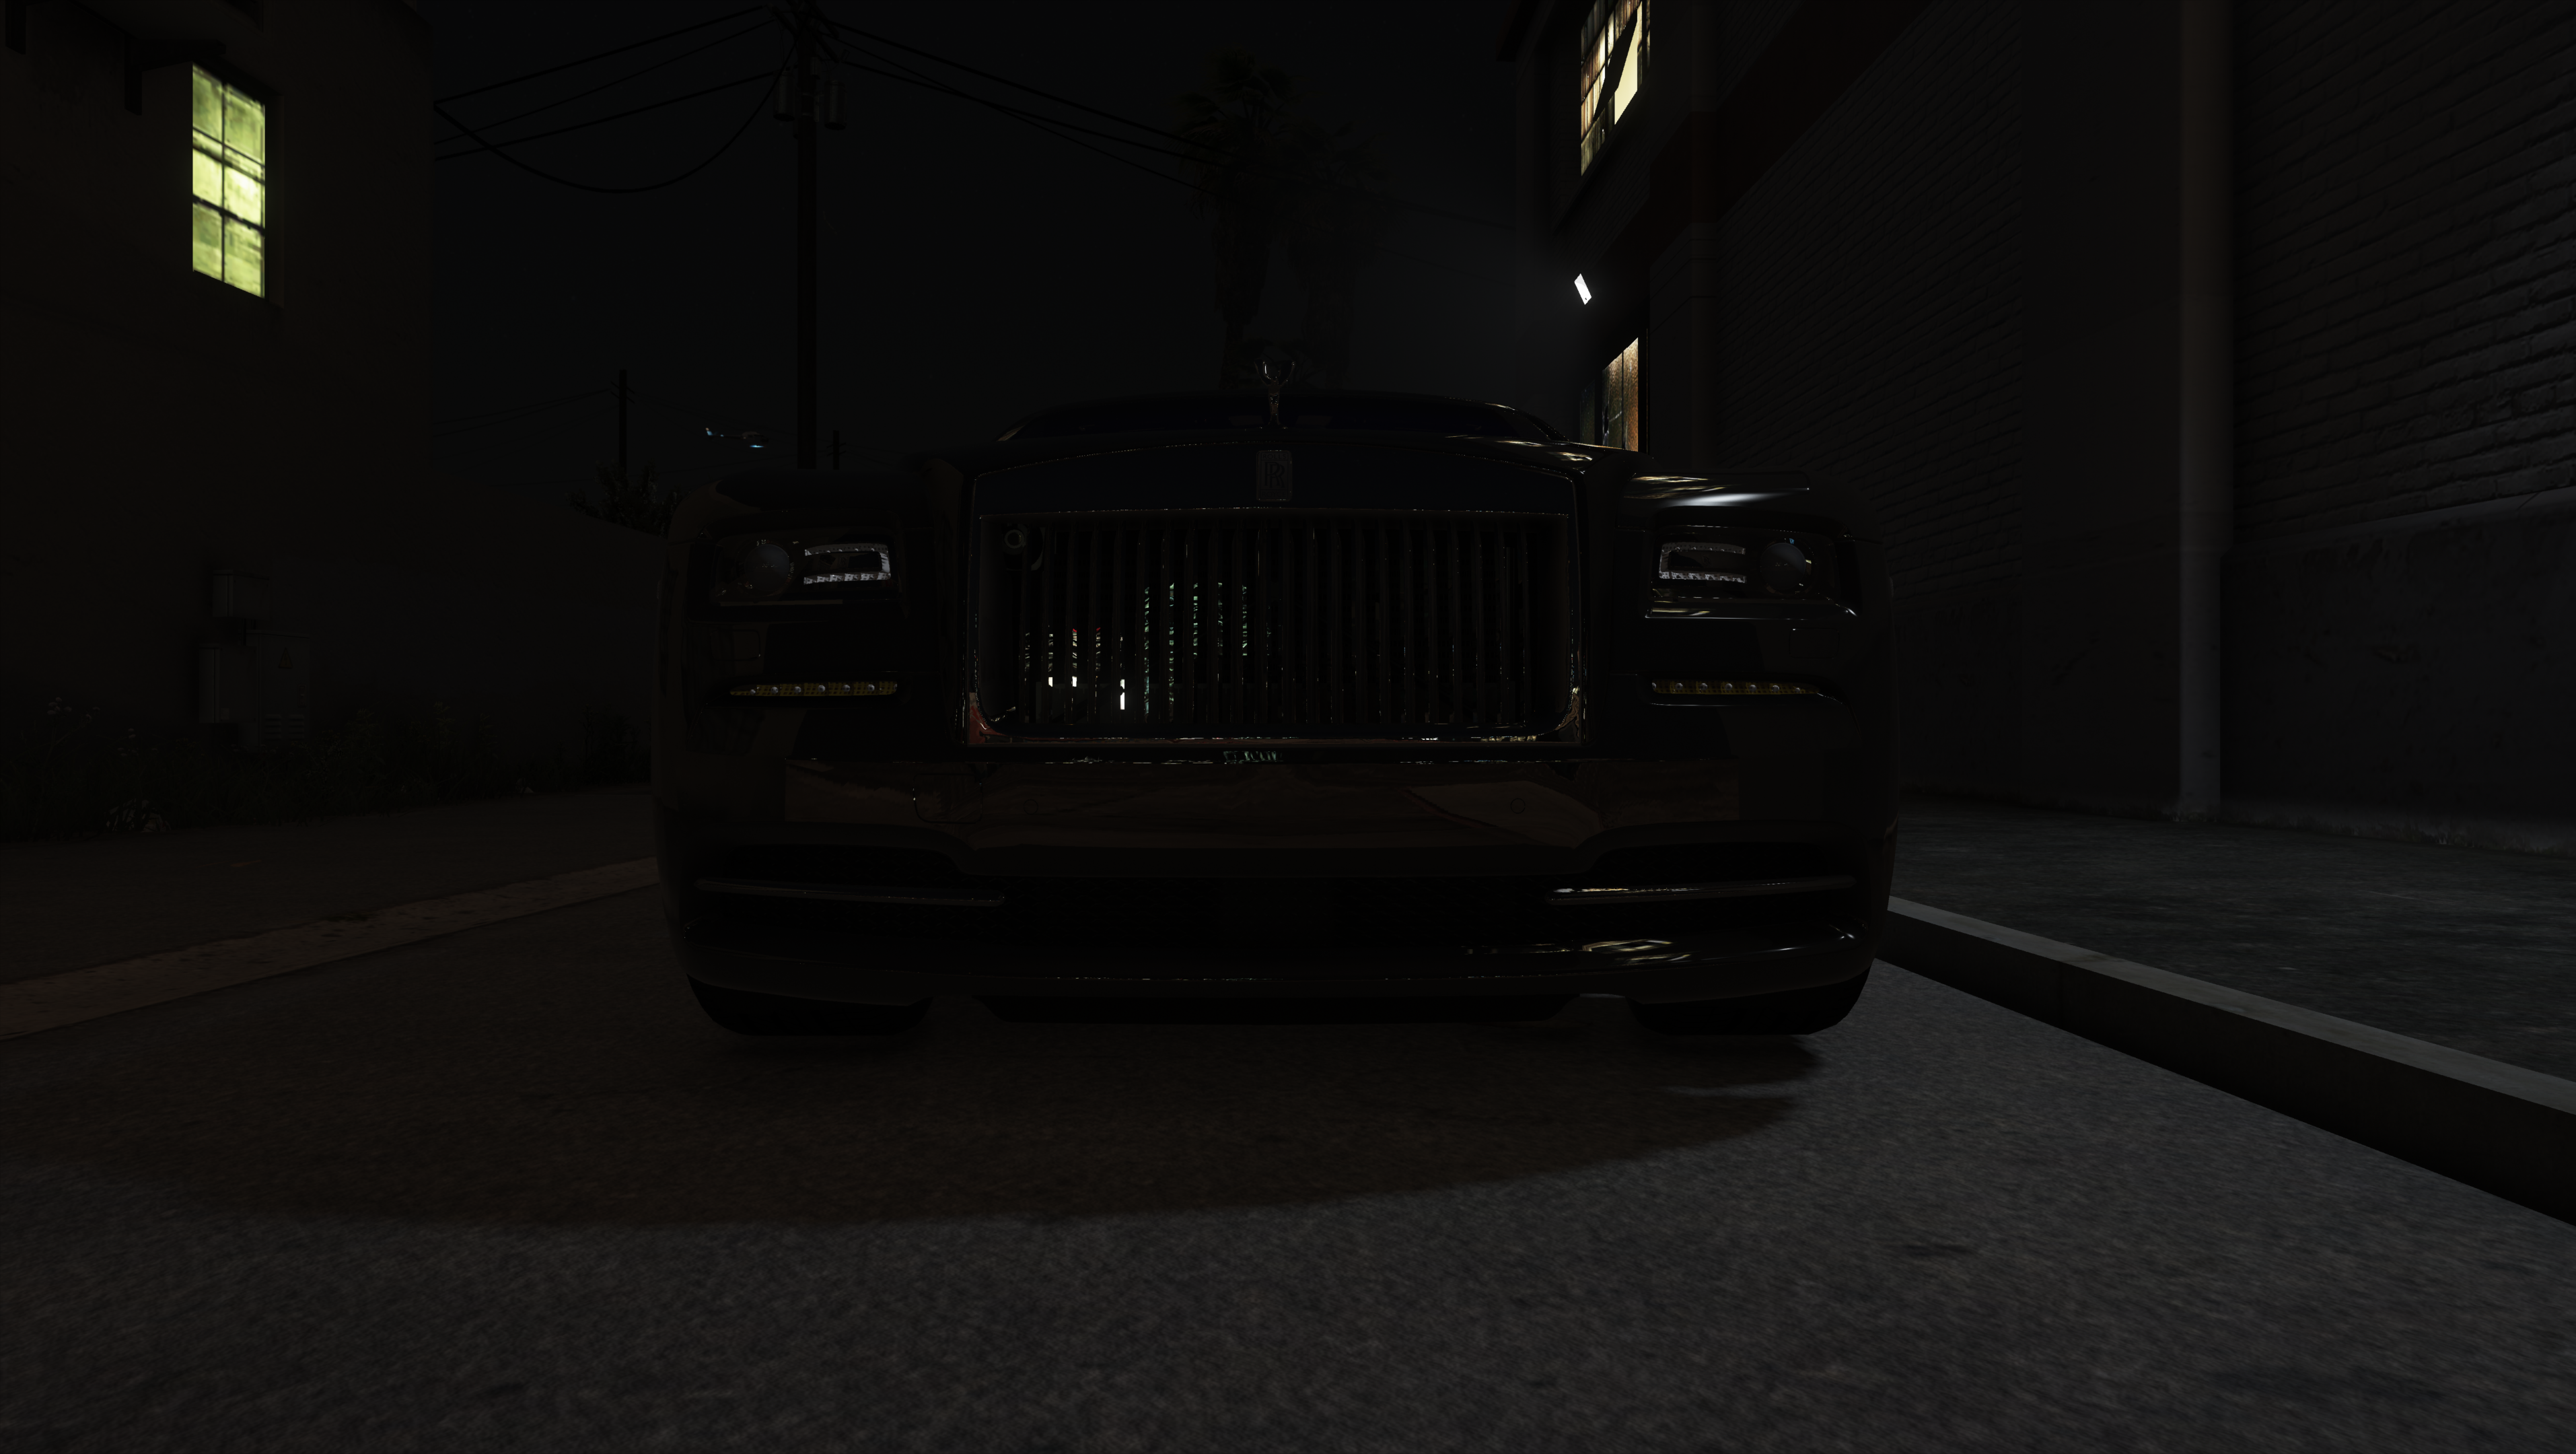 General 3828x2160 Rolls-Royce black cars Grand Theft Auto V Grand Theft Auto car vehicle video games PC gaming screen shot